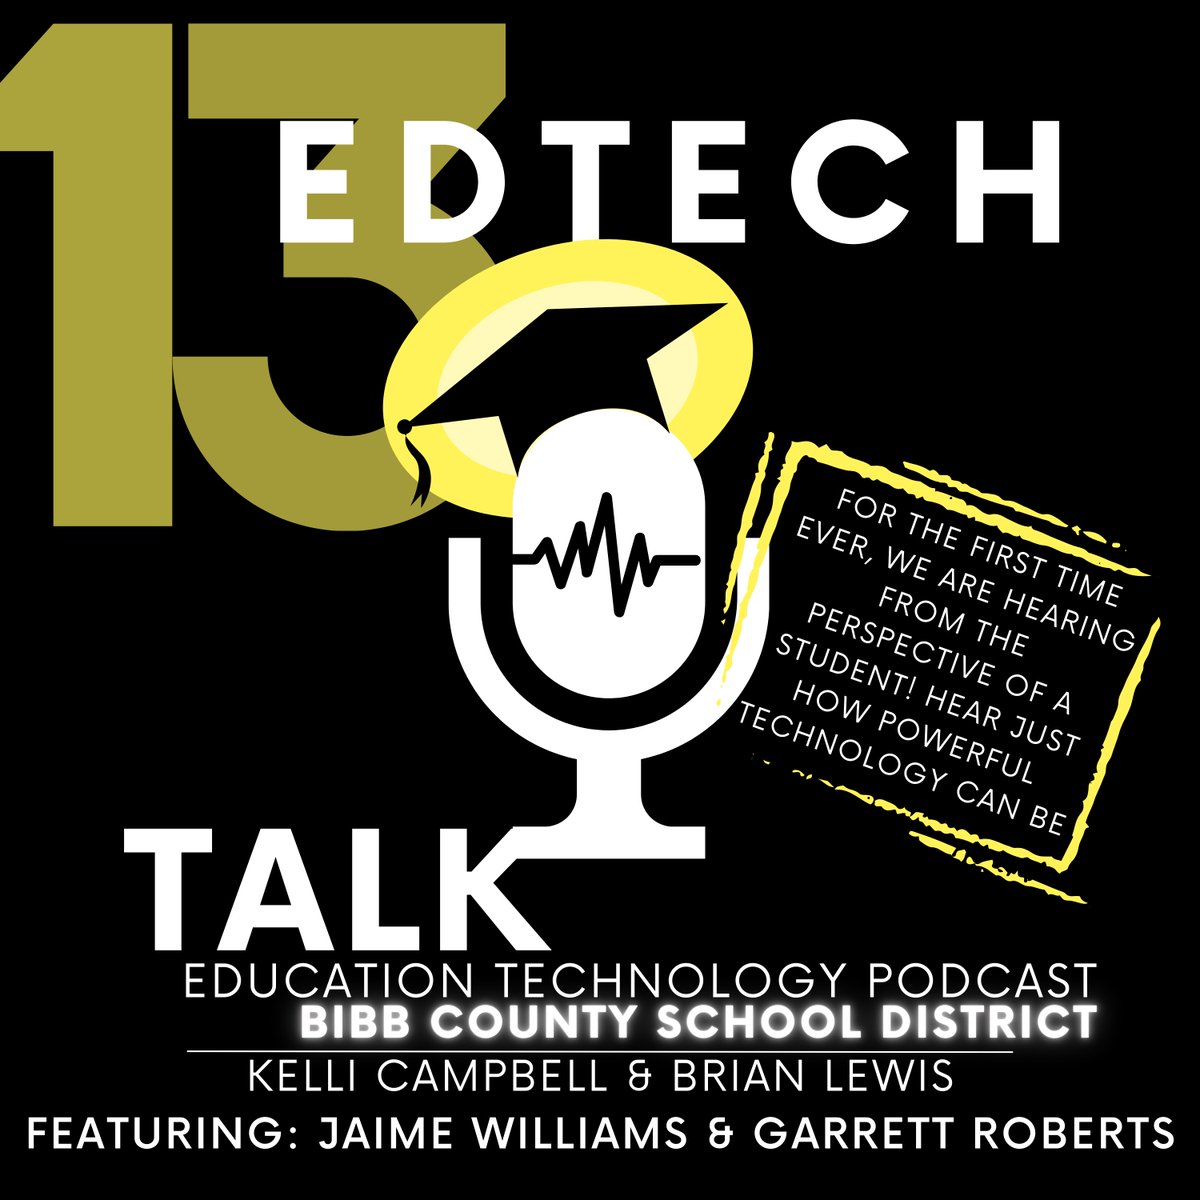 Stop what you're doing and check out the latest episode of the EdTech Talk, you won't want to miss this one!! @BibbSchools @BibbSTEMed @Ozobot @usabbs spotifyanchor-web.app.link/e/kC8Opc96BHb